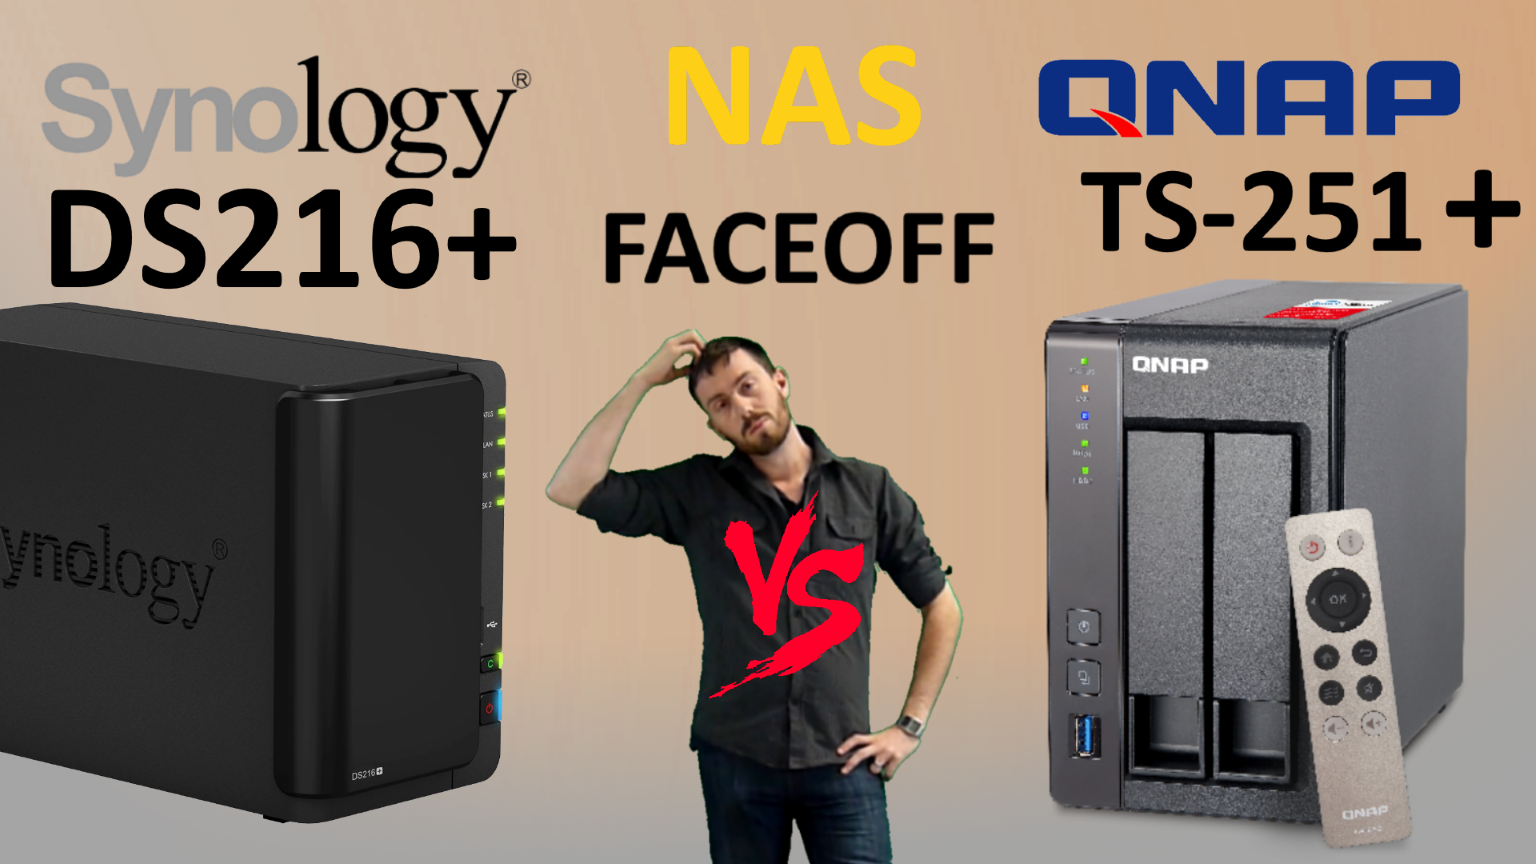 The Synology DS216+ Vs the QNAP TS-251+ – Which one deserves your Data?